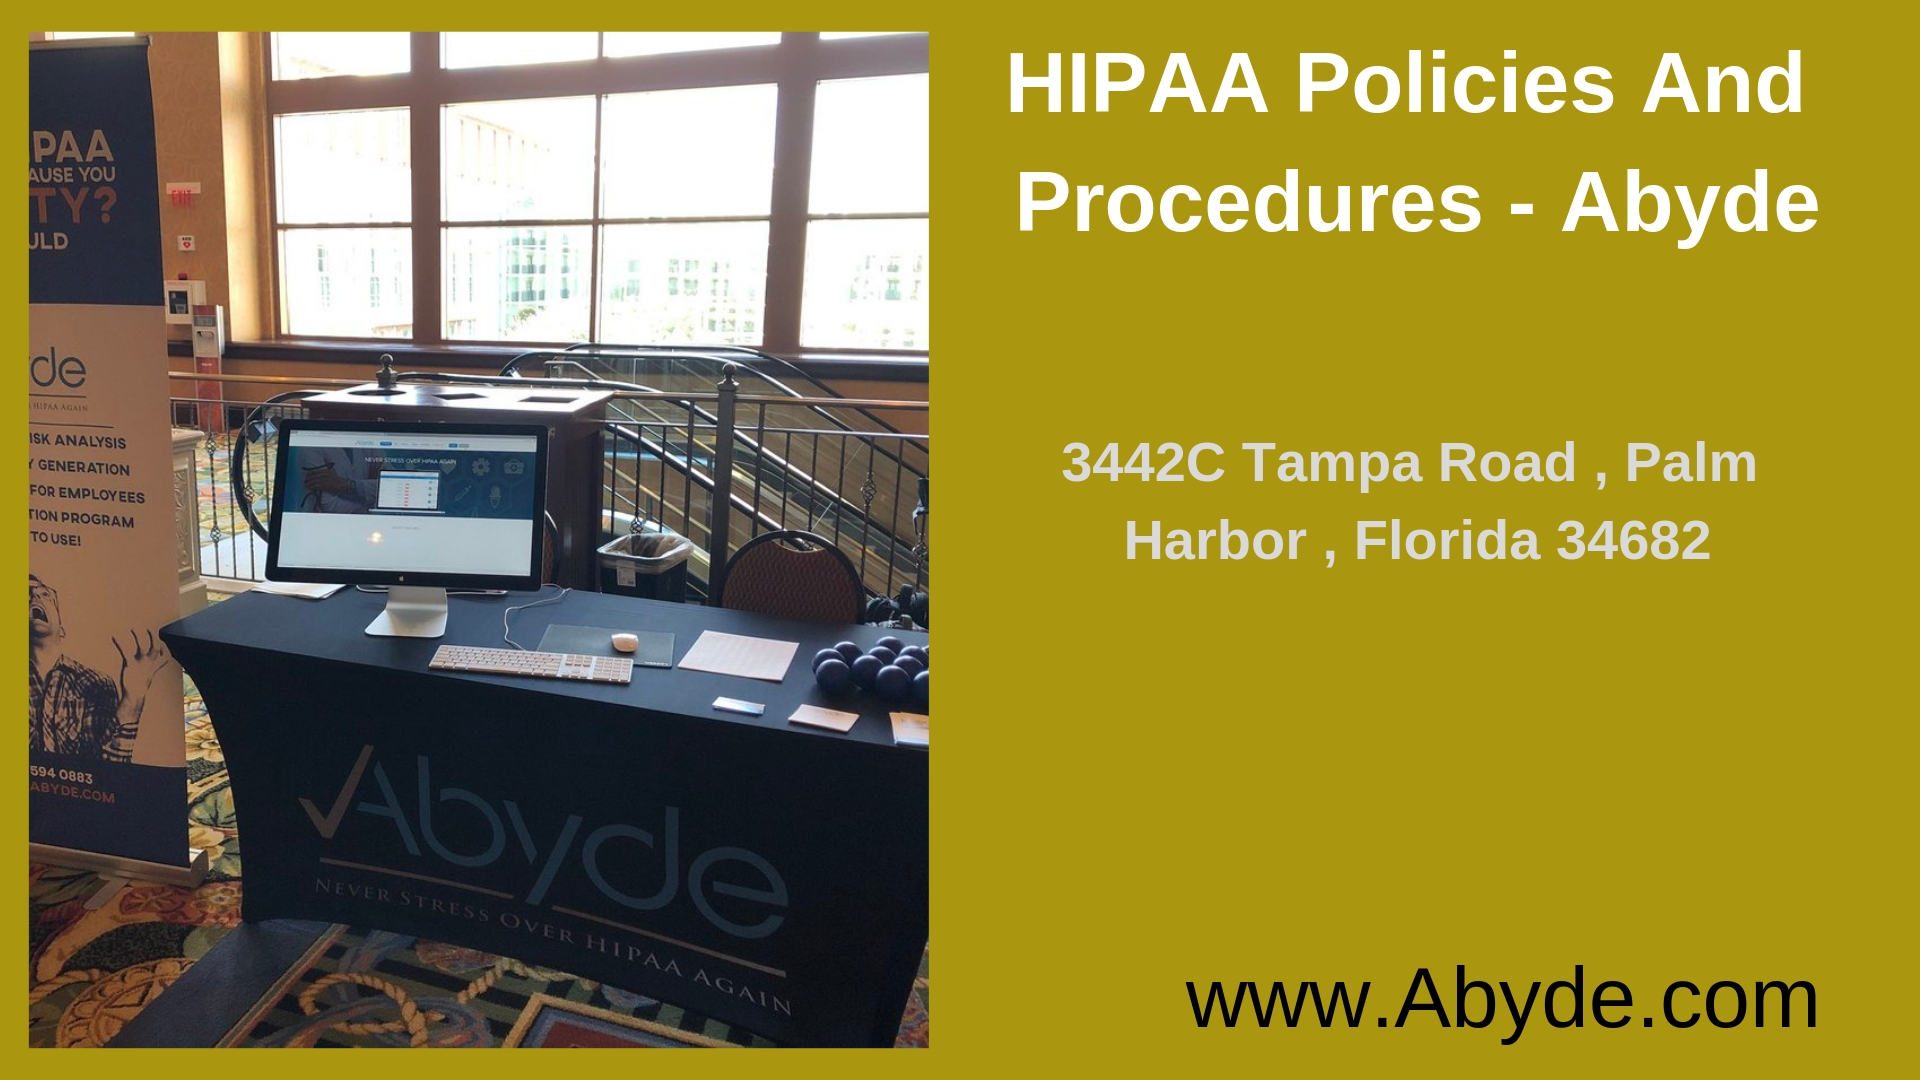 Hipaa Risk Analysis - Abyde.jpg  by continualcompliance